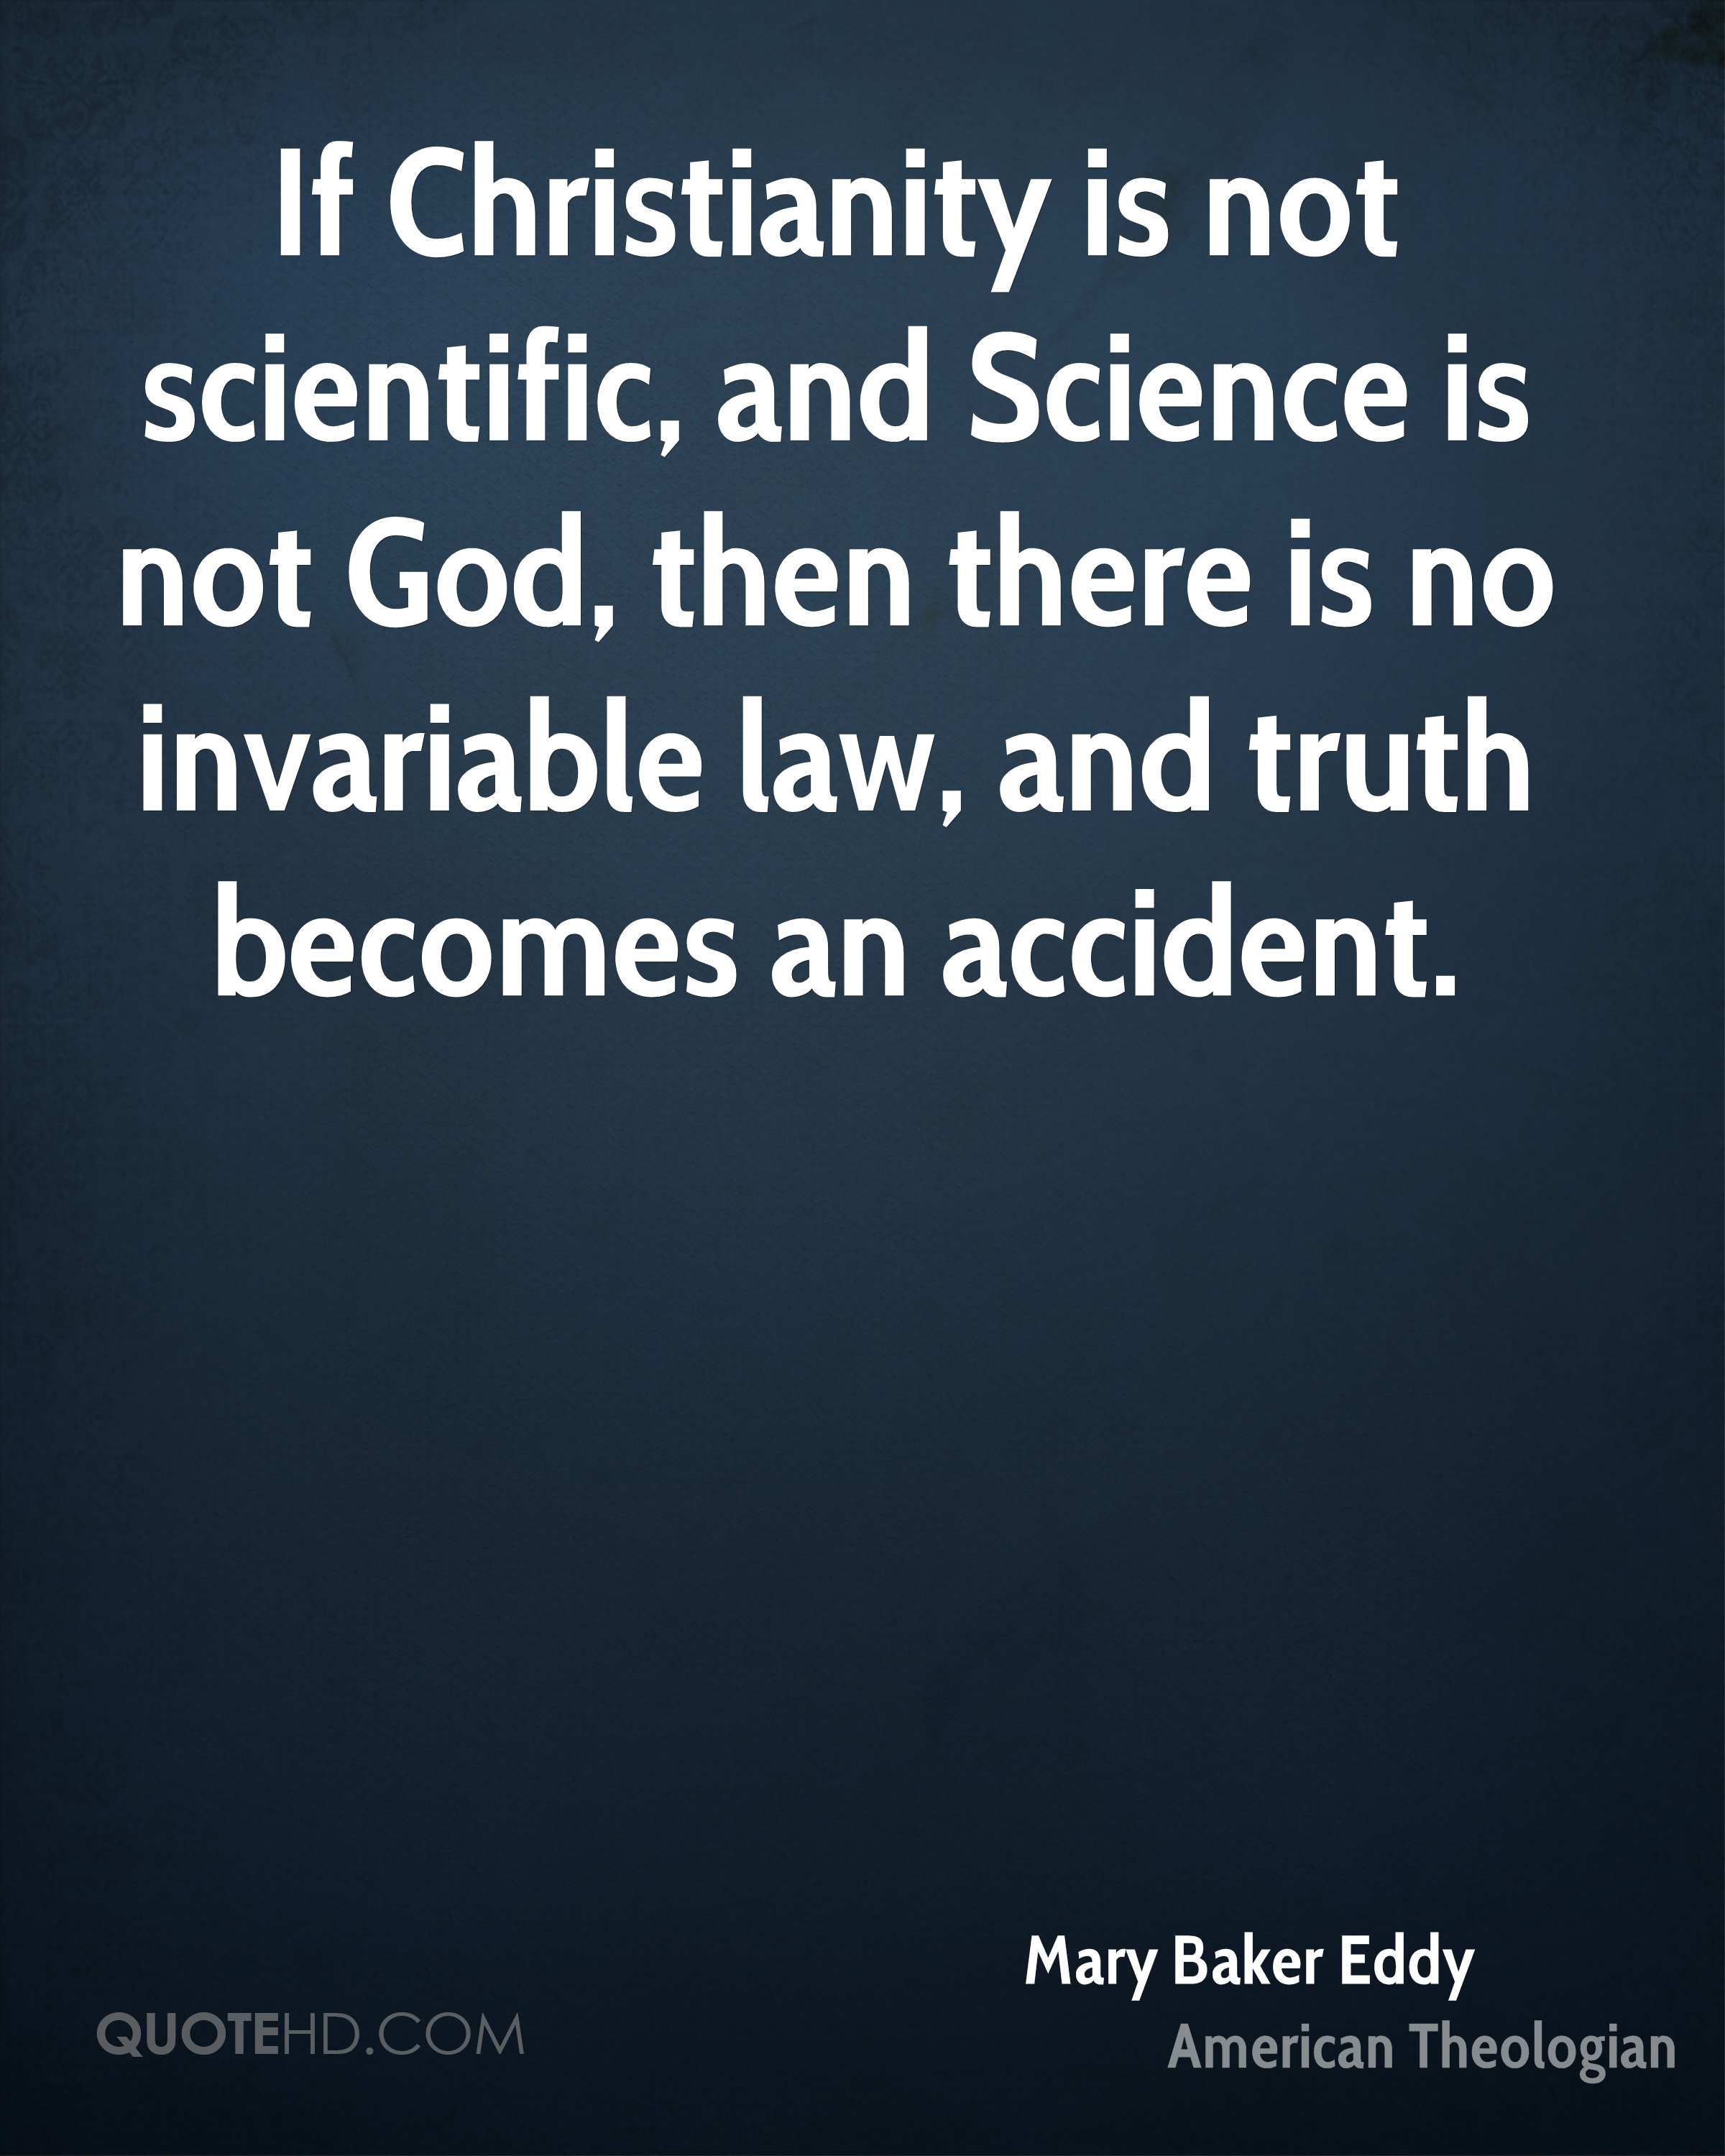 If Christianity is not scientific, and Science is not God, then there is no invariable law, and truth becomes an accident. mary baker eddy